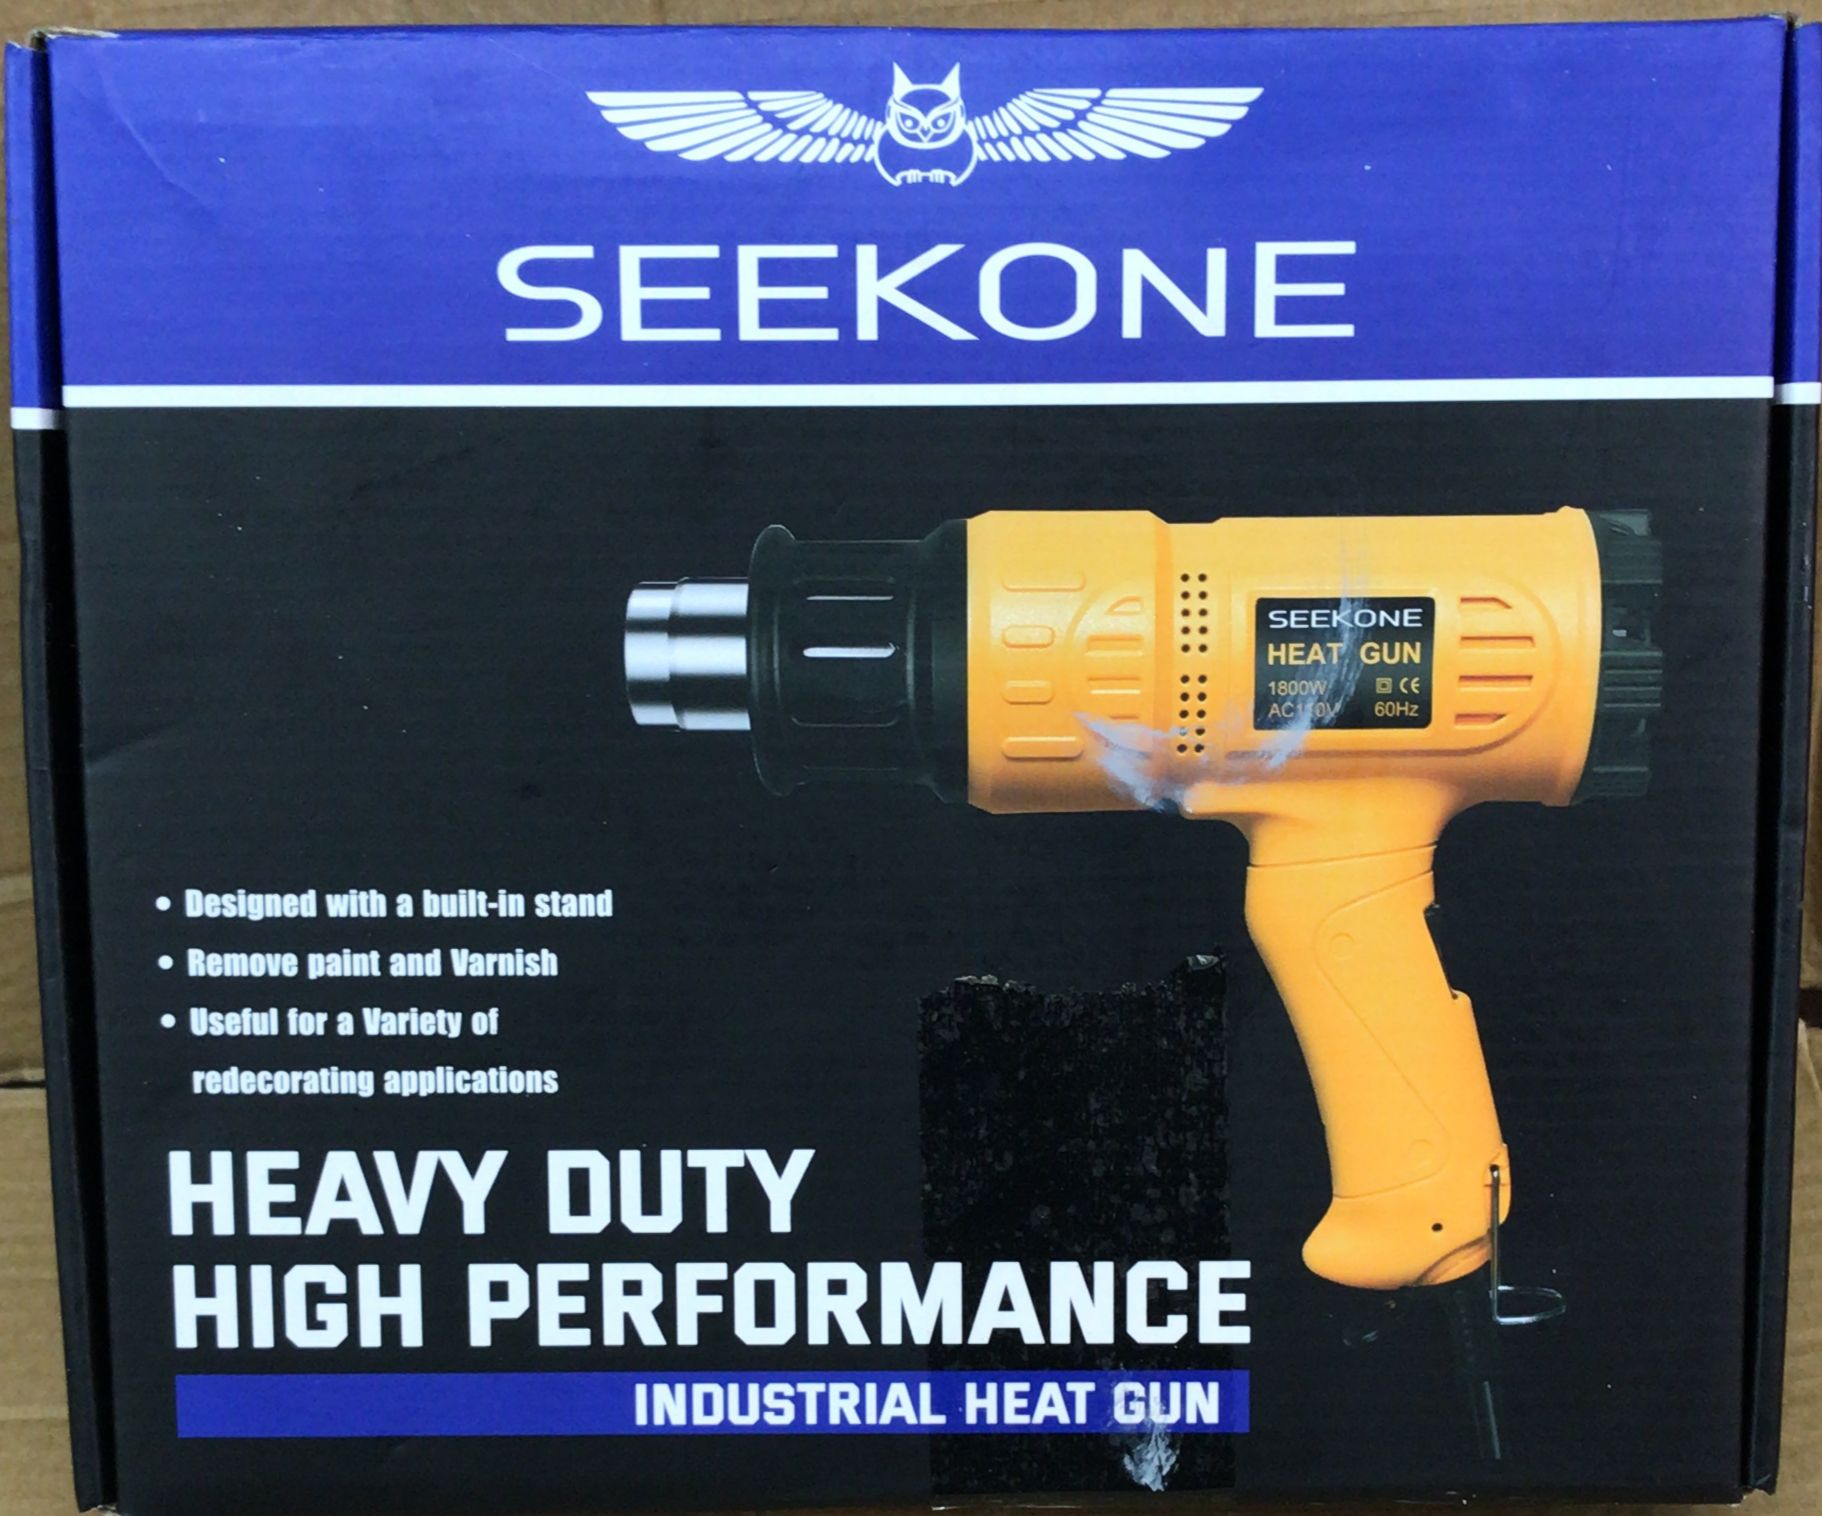 SEEKONE Foldable Heat Gun 1800W with Dual-Temperature Settings 400°C/600°C Fast Heating, Hot Air Gun Kit with 4 Nozzels with Overload Protection for Vinyl Wrap, Crafts, Shrink Tubing, Stripping Paint-0022